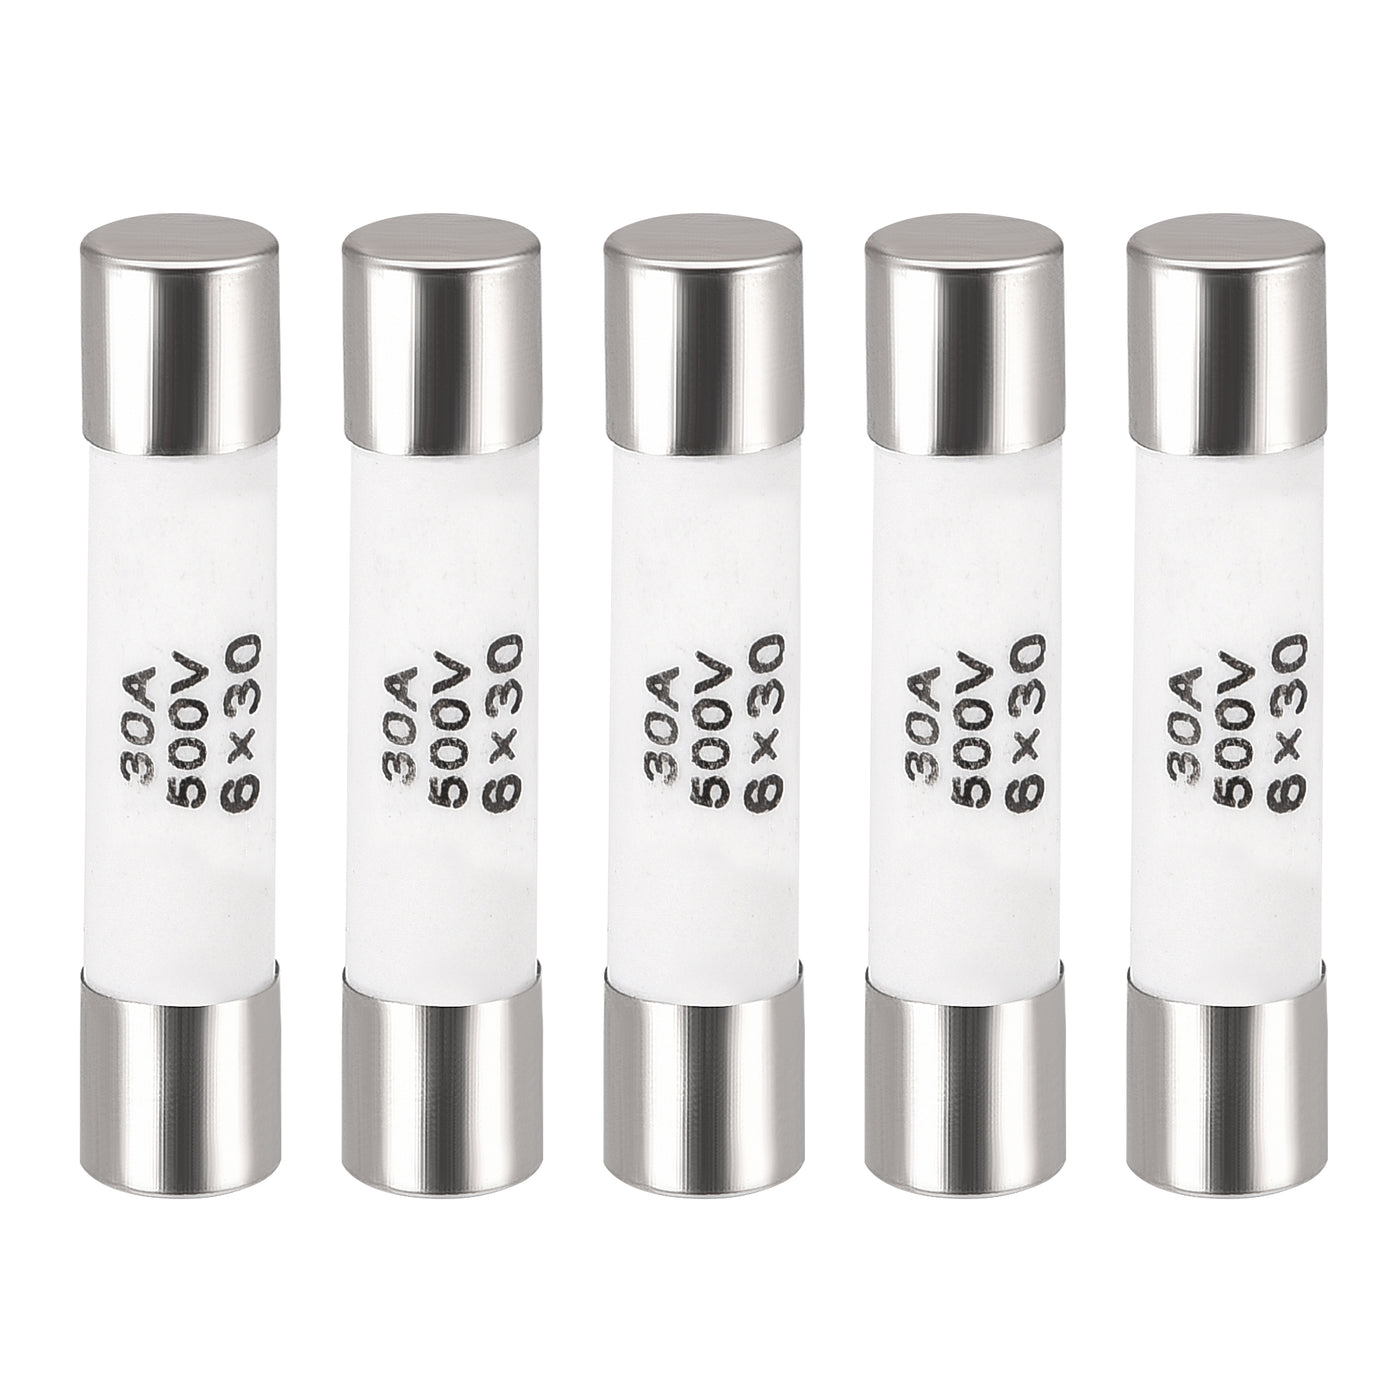 uxcell Uxcell Ceramic Cartridge Fuses 30A 500V 6x30mm Fast Blow for Energy Saving Lamp 5pcs